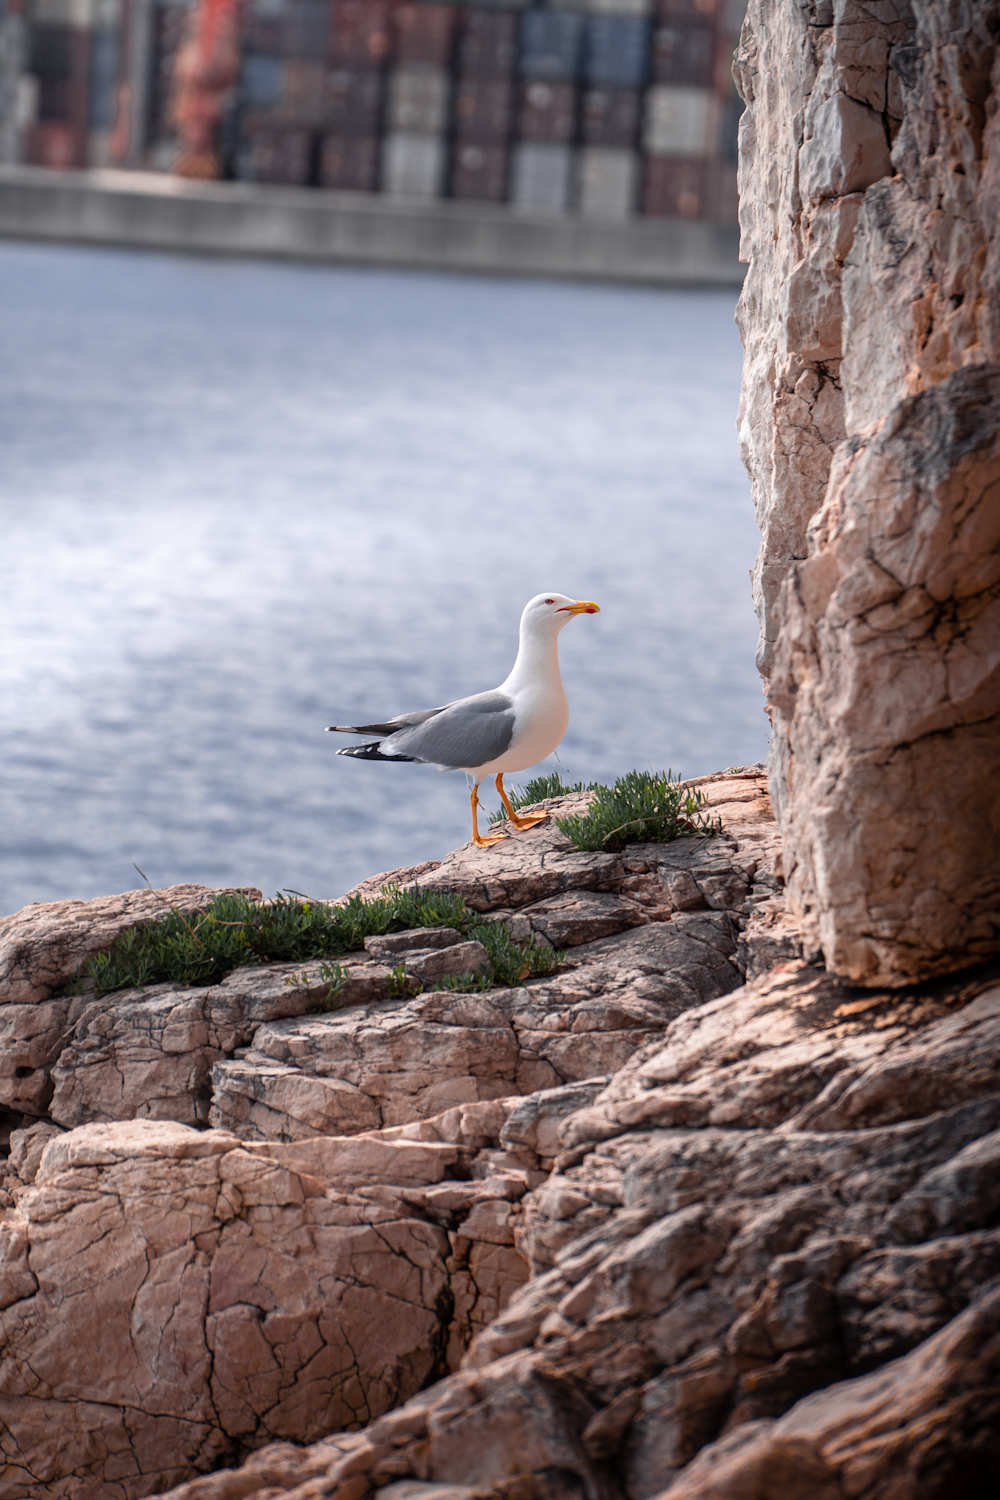 a seagull is standing on a rock near a body of water